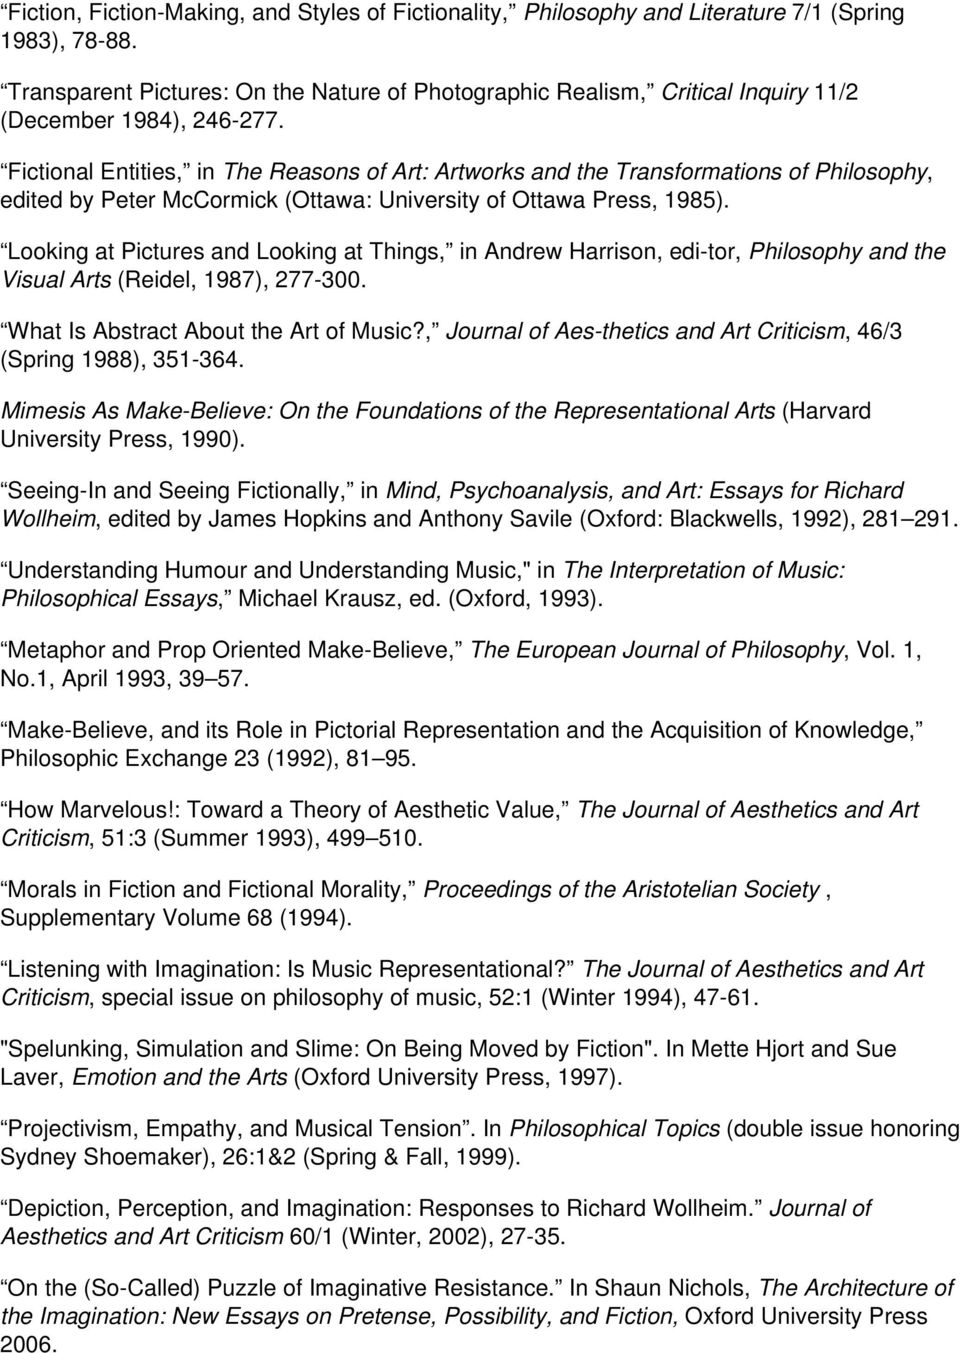 Fictional Entities, in The Reasons of Art: Artworks and the Transformations of Philosophy, edited by Peter McCormick (Ottawa: University of Ottawa Press, 1985).